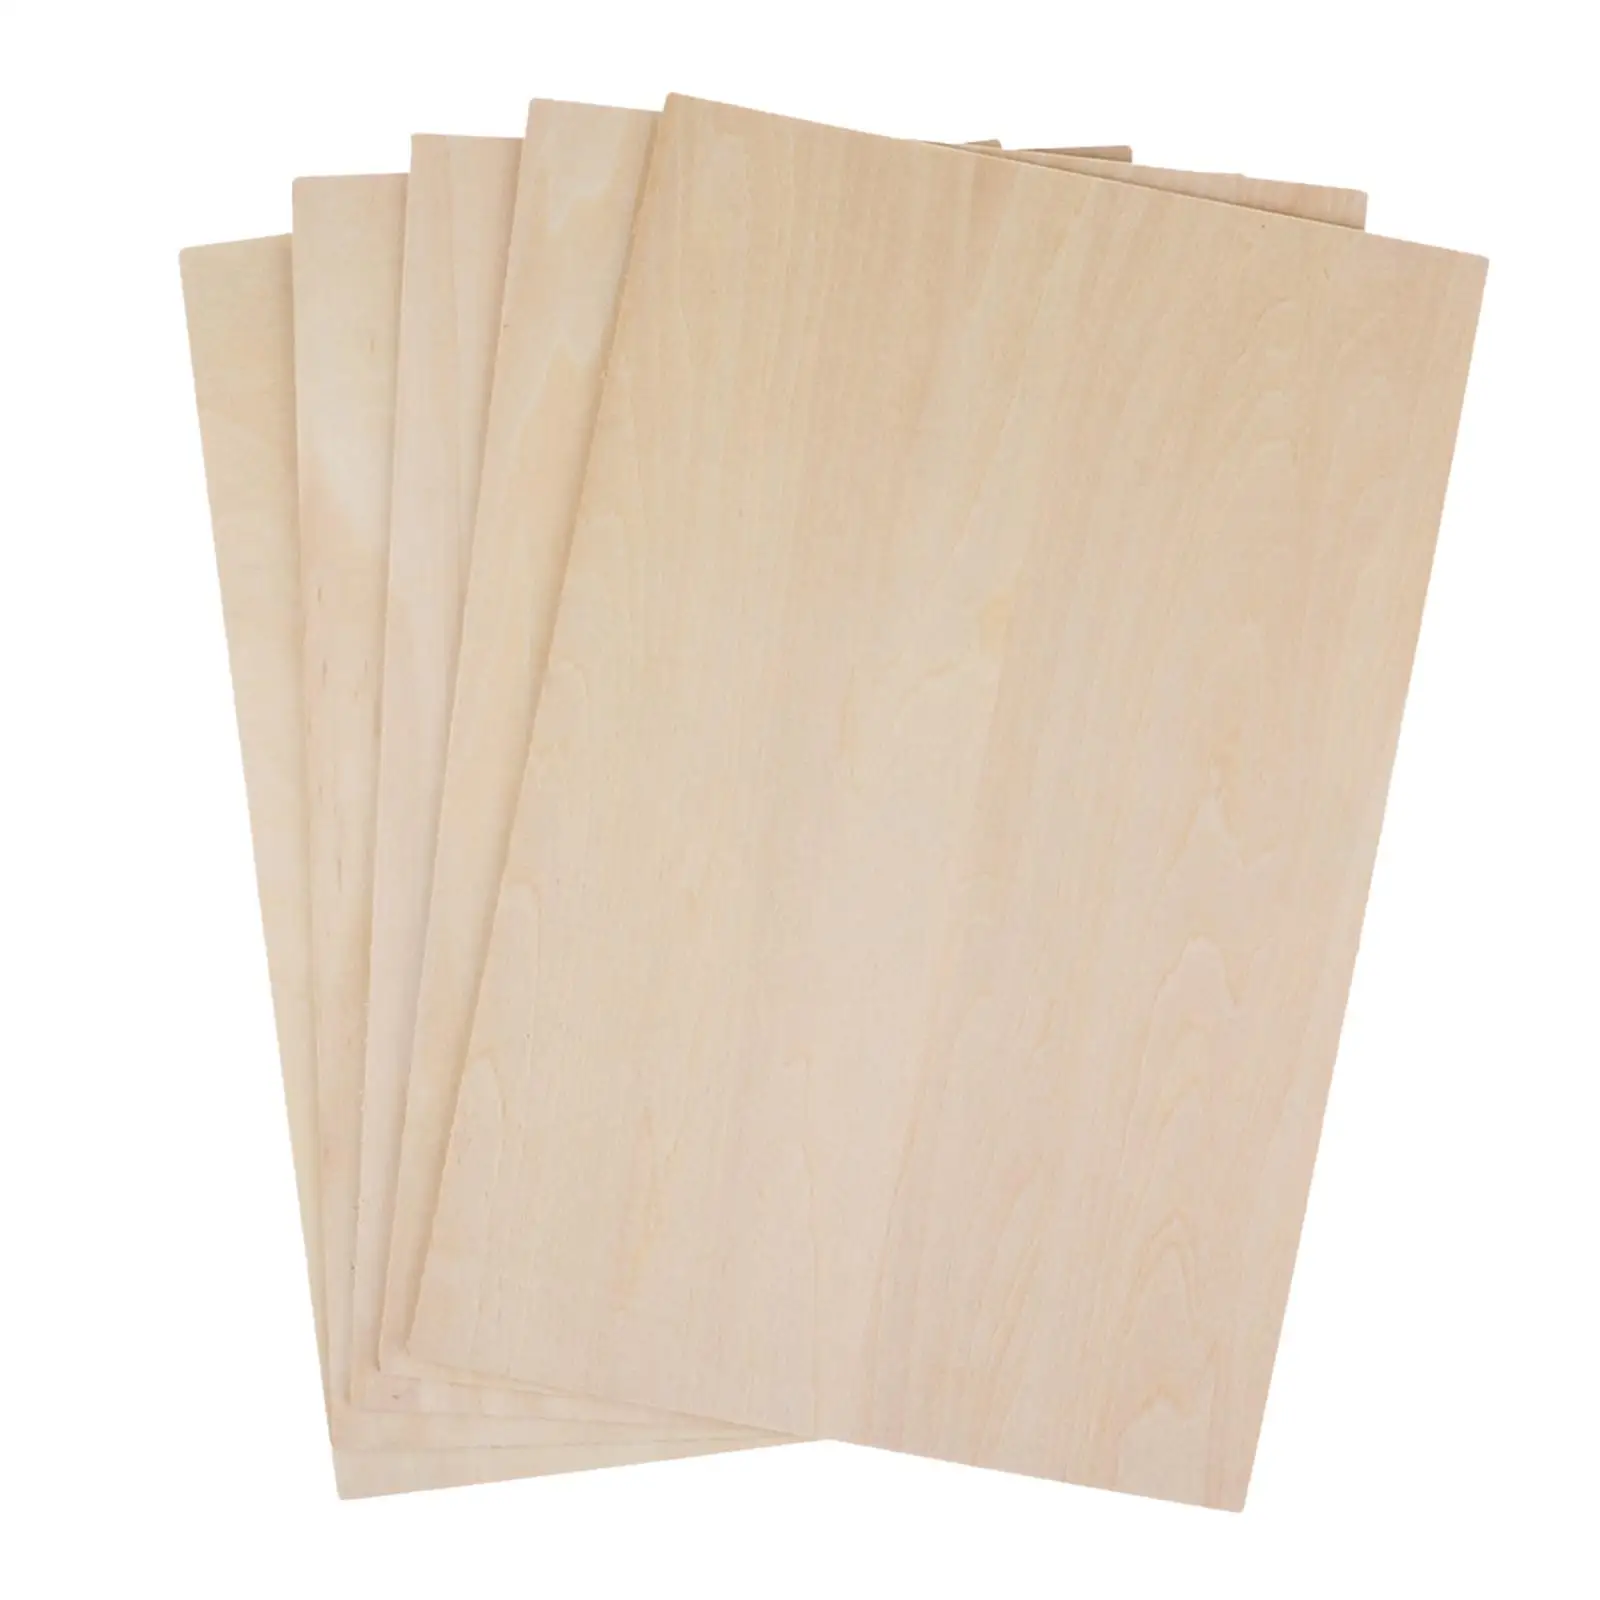 10Pcs Thin Plywood Board Wood Sheets Board Unfinished Wood 200x200x2mm for DIY Project Crafts Miniature Aircraft Sailboat Models